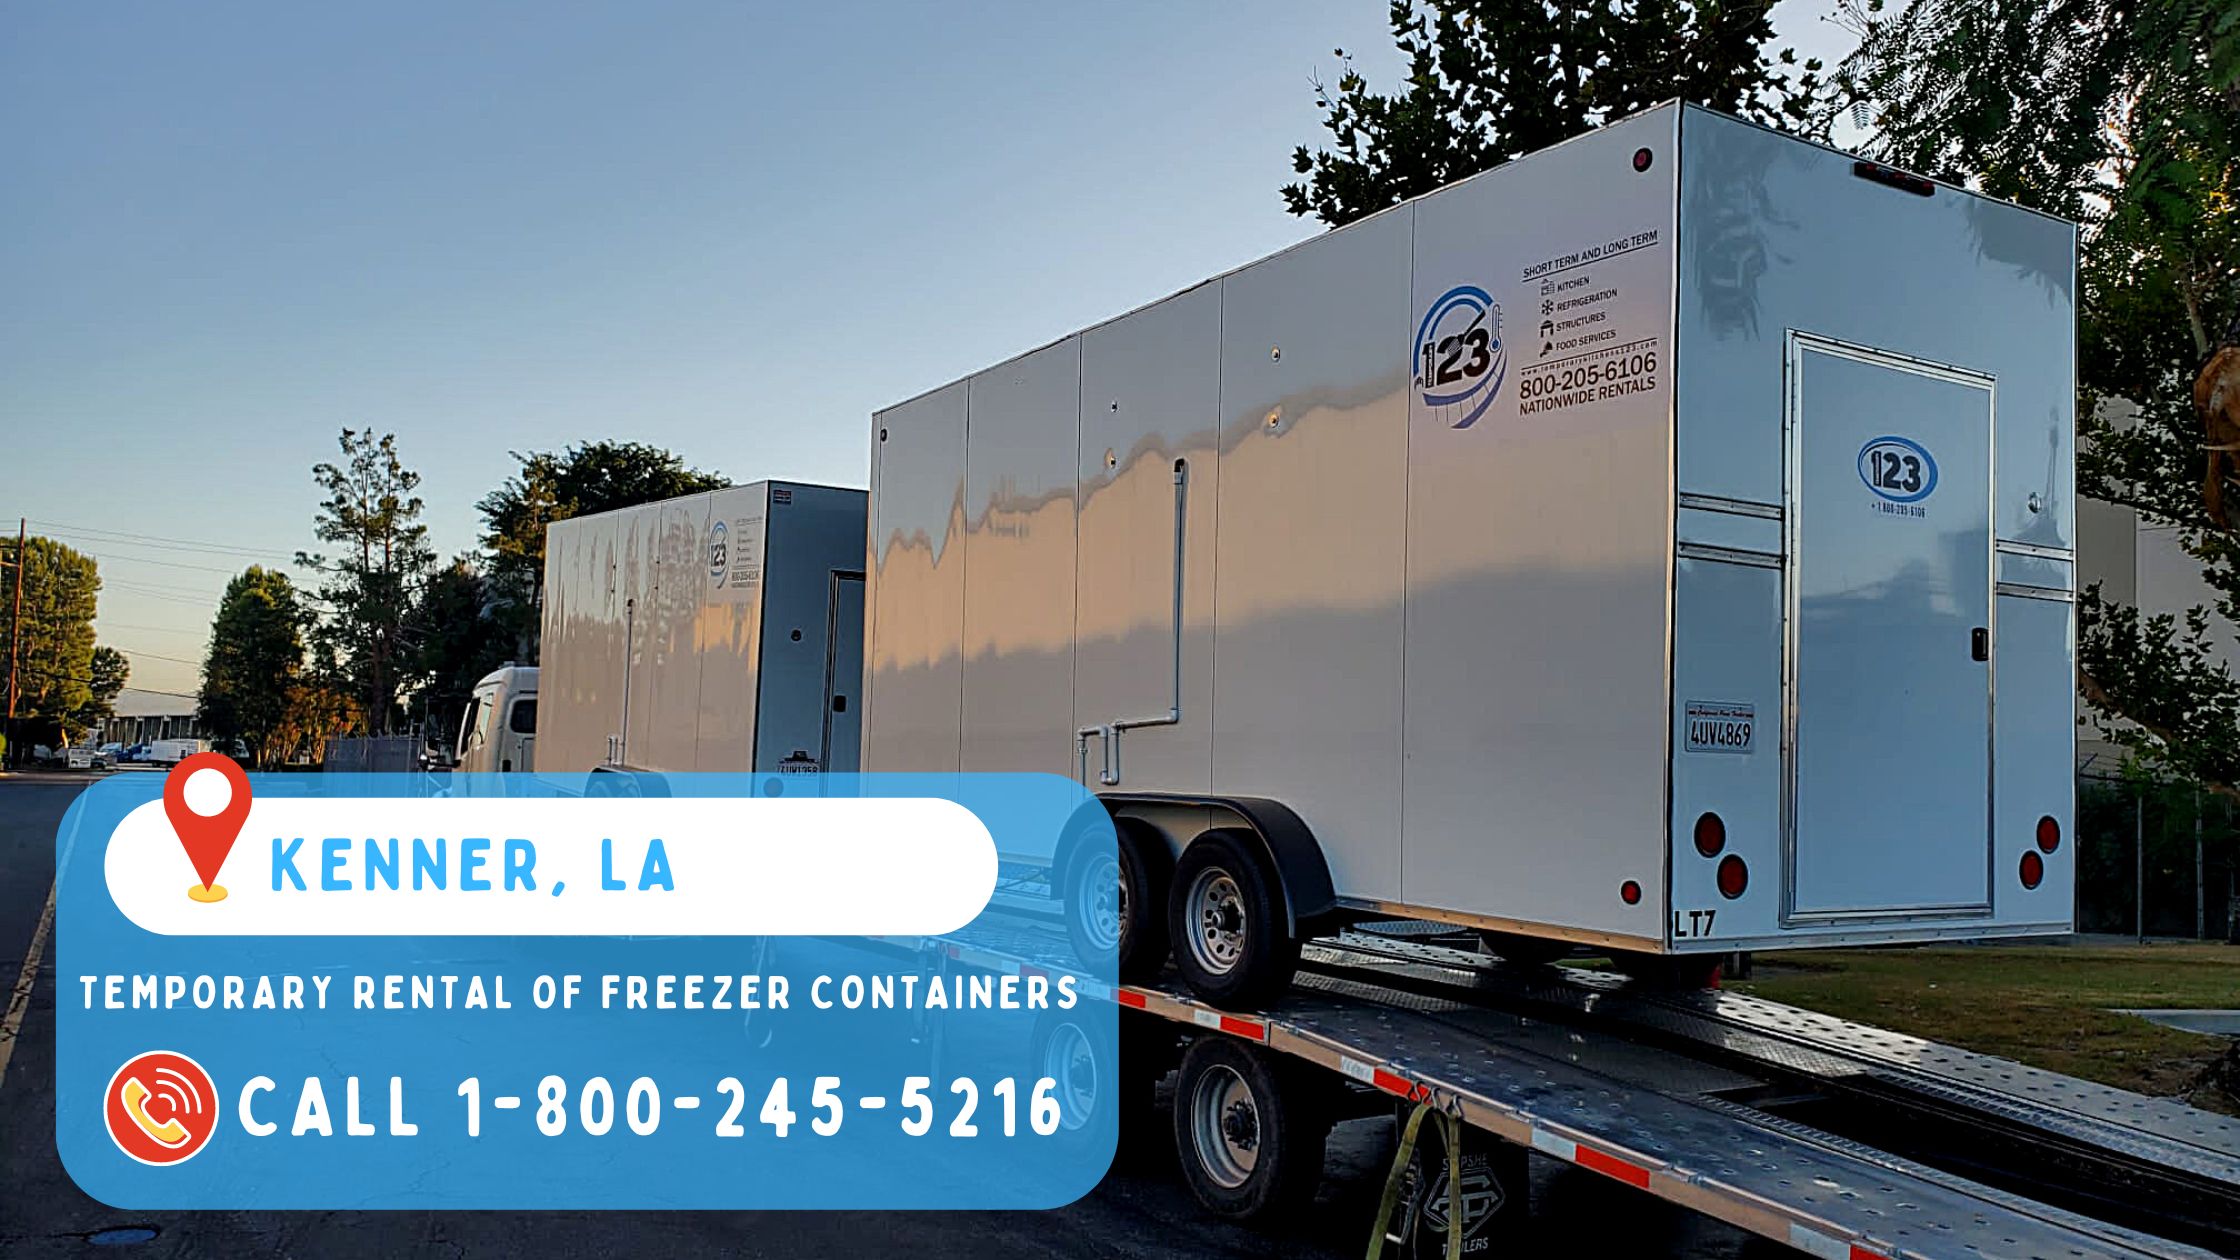 Temporary rental of freezer containers in Kenner